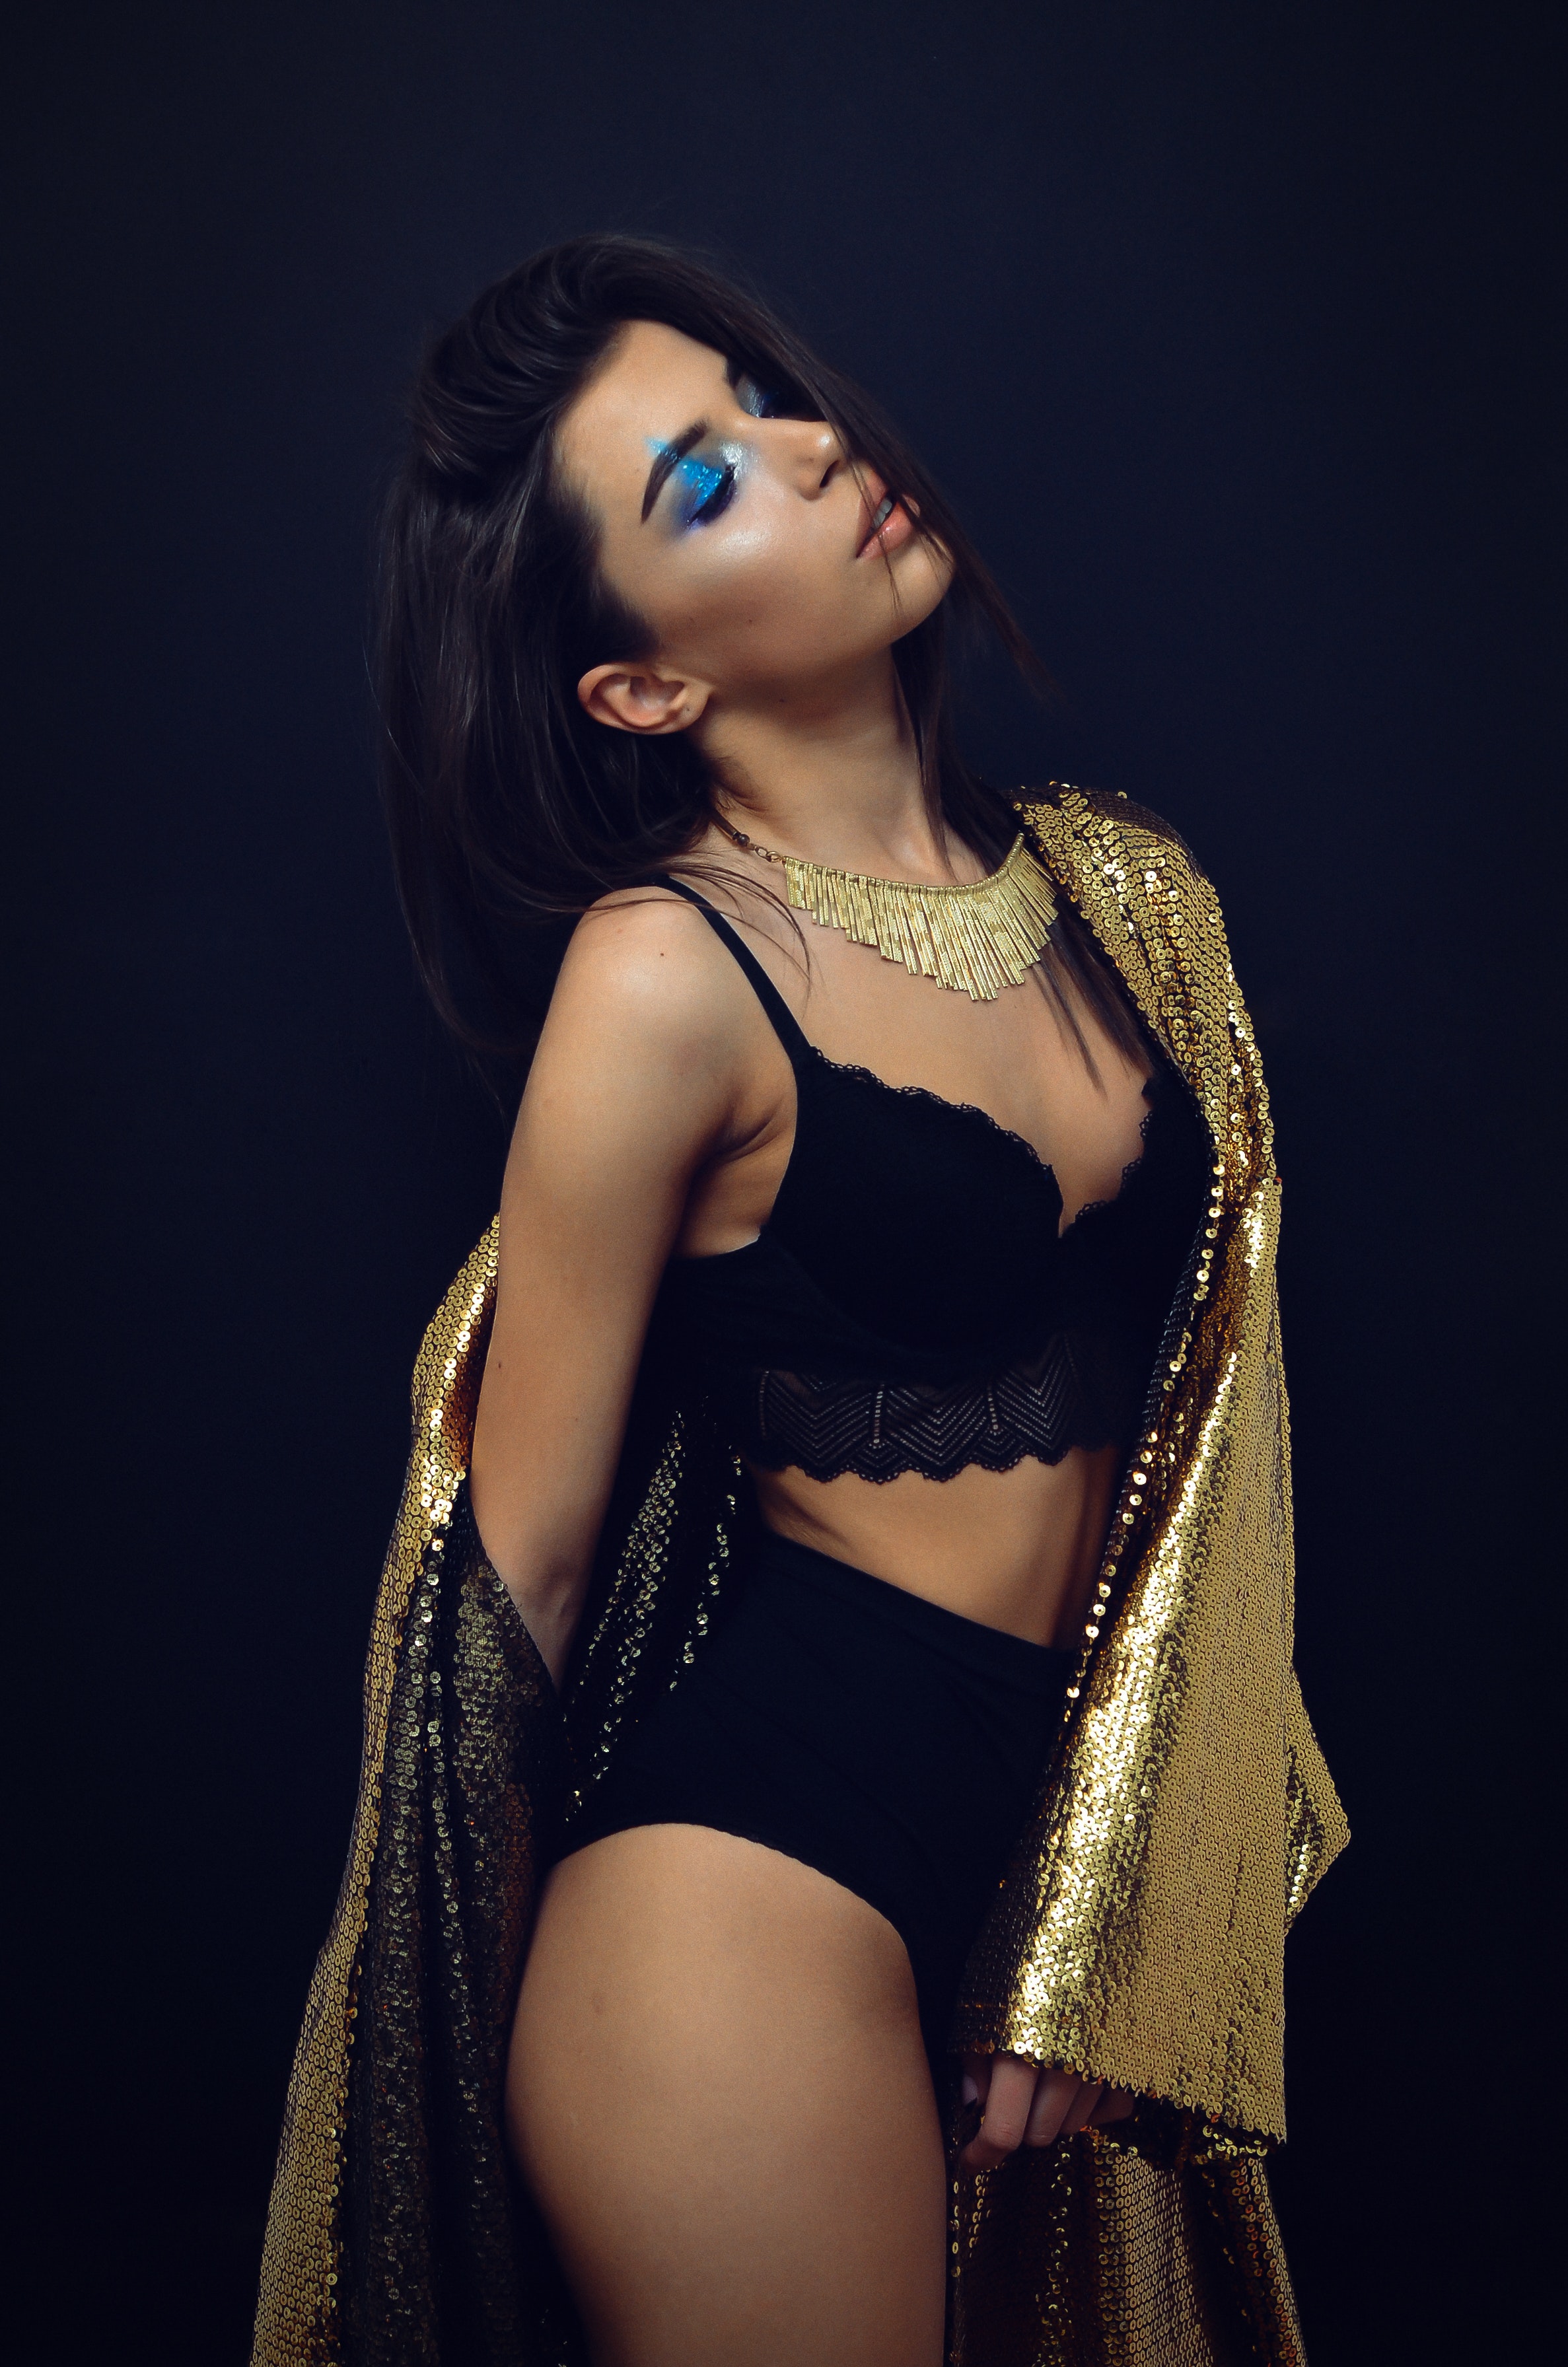 Woman wearing black brassiere and panty with sequinned gold-colored coat robe photo